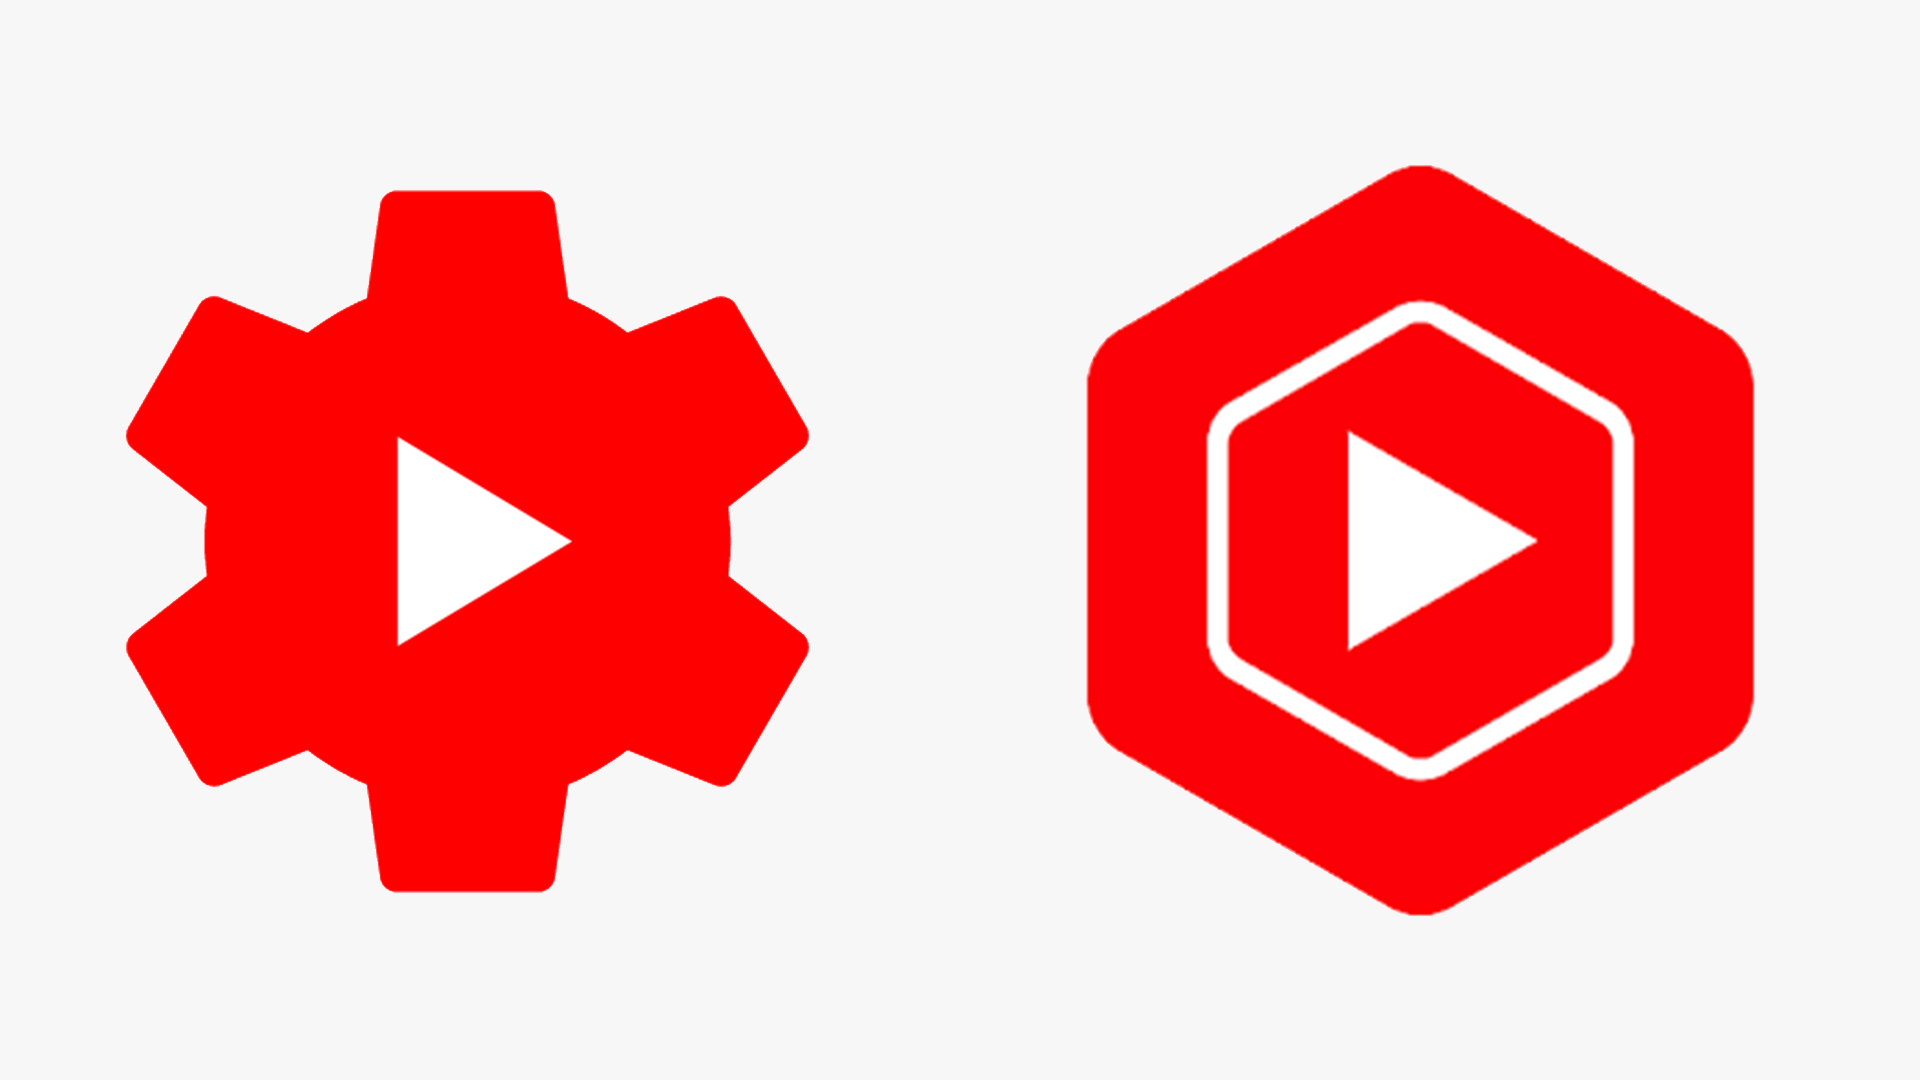 The New Youtube Studio Logo Is Really Grinding Users Gears Creative Bloq